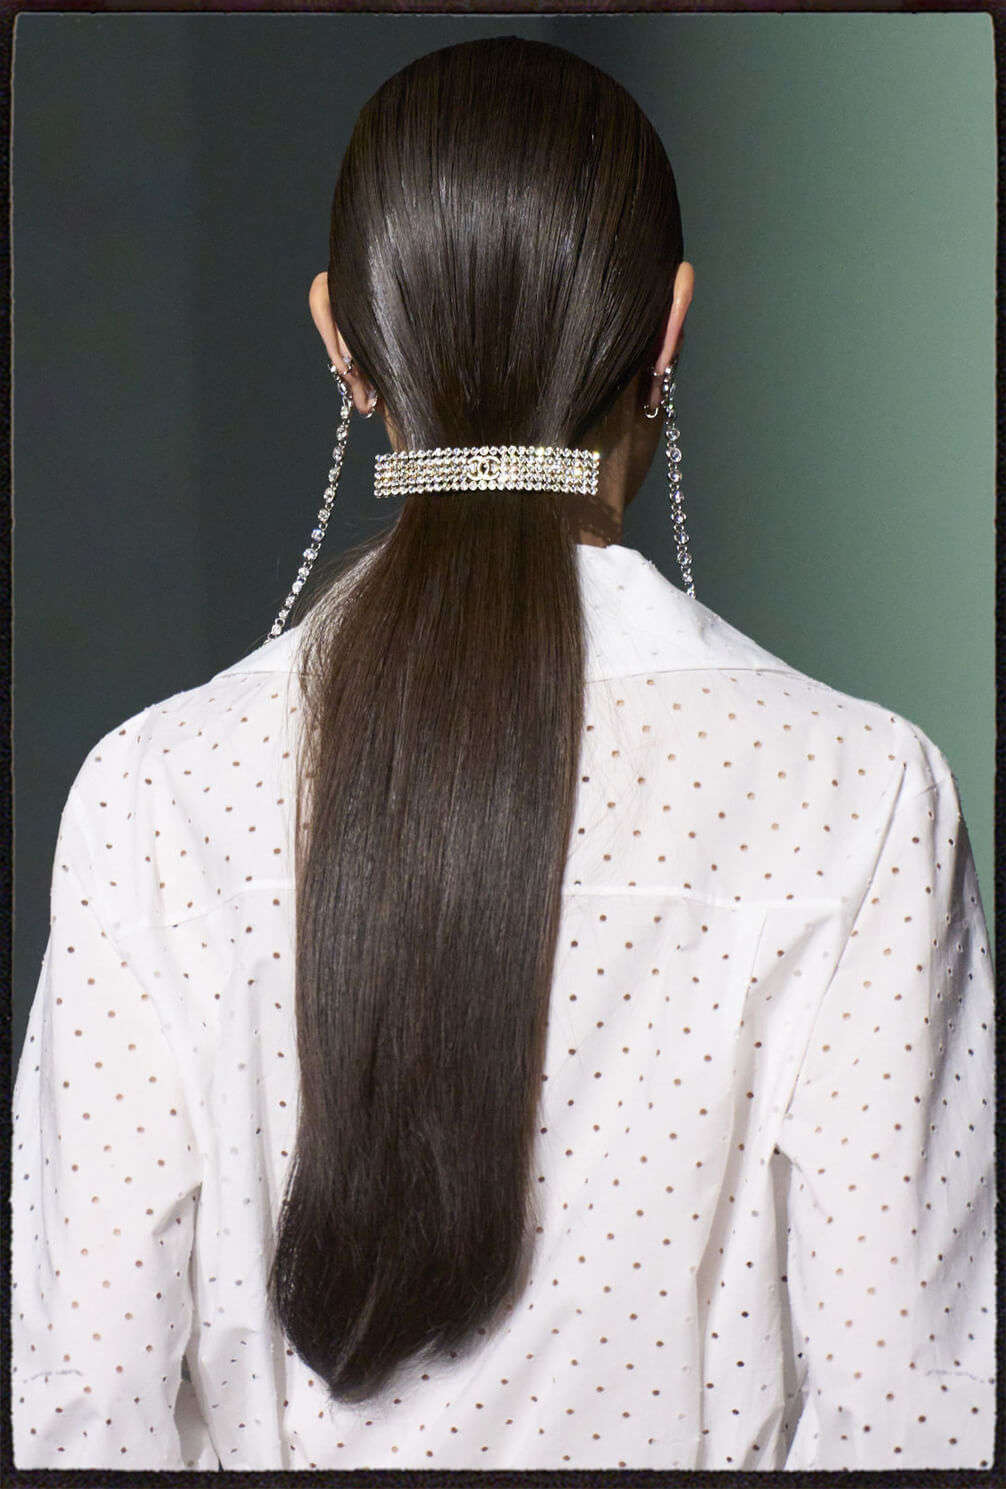 SS23 hair trends